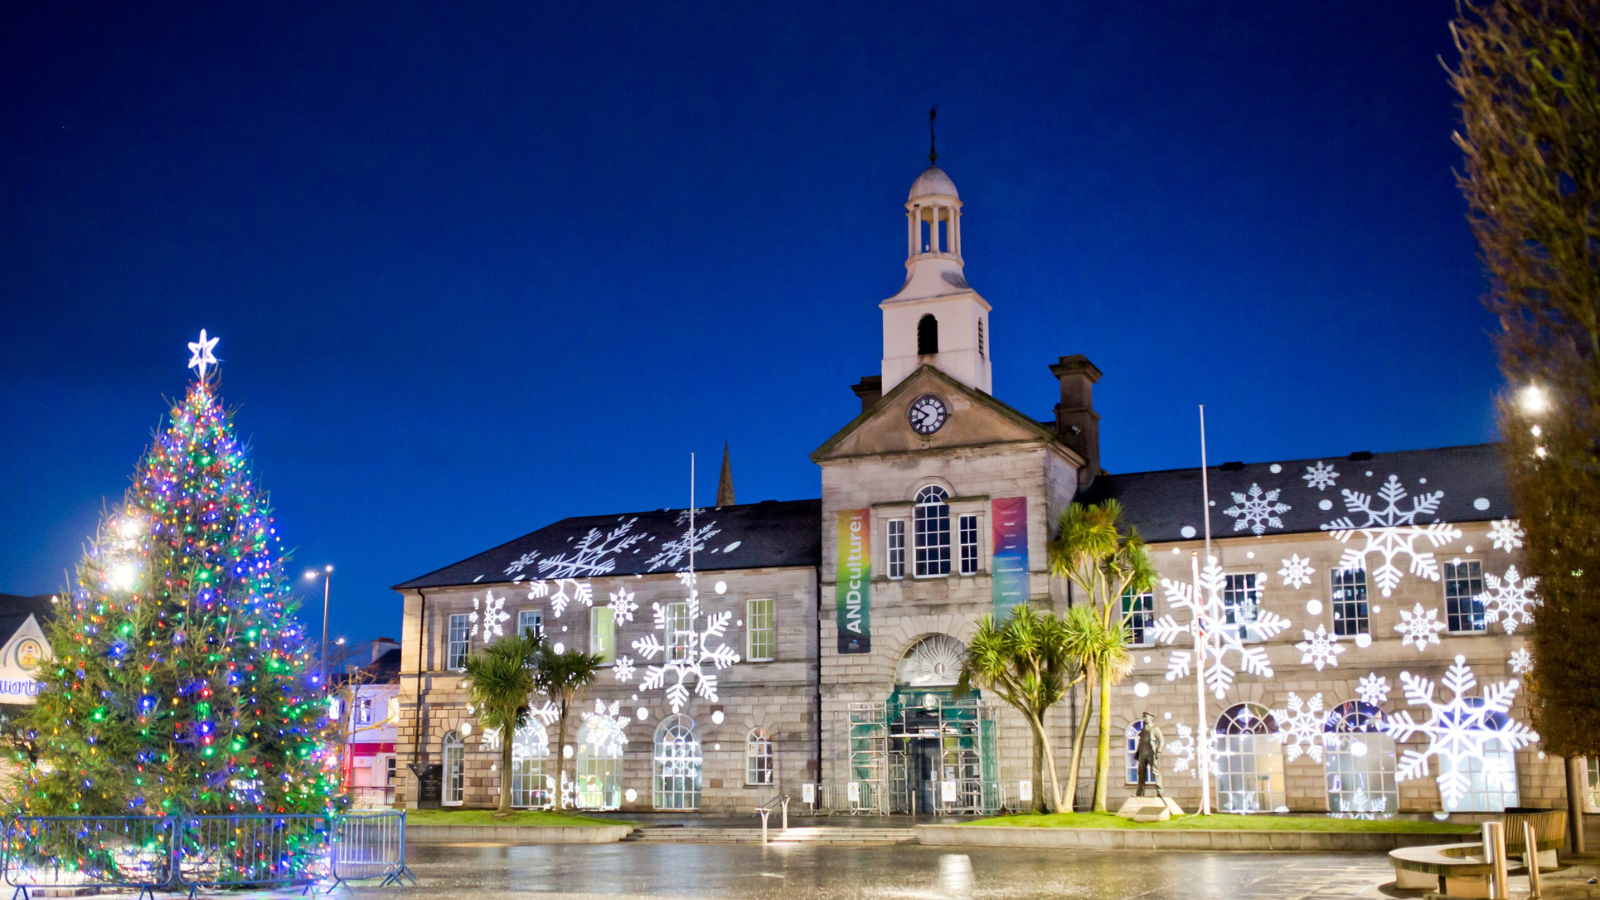 Ards Arts Centre at Christmas